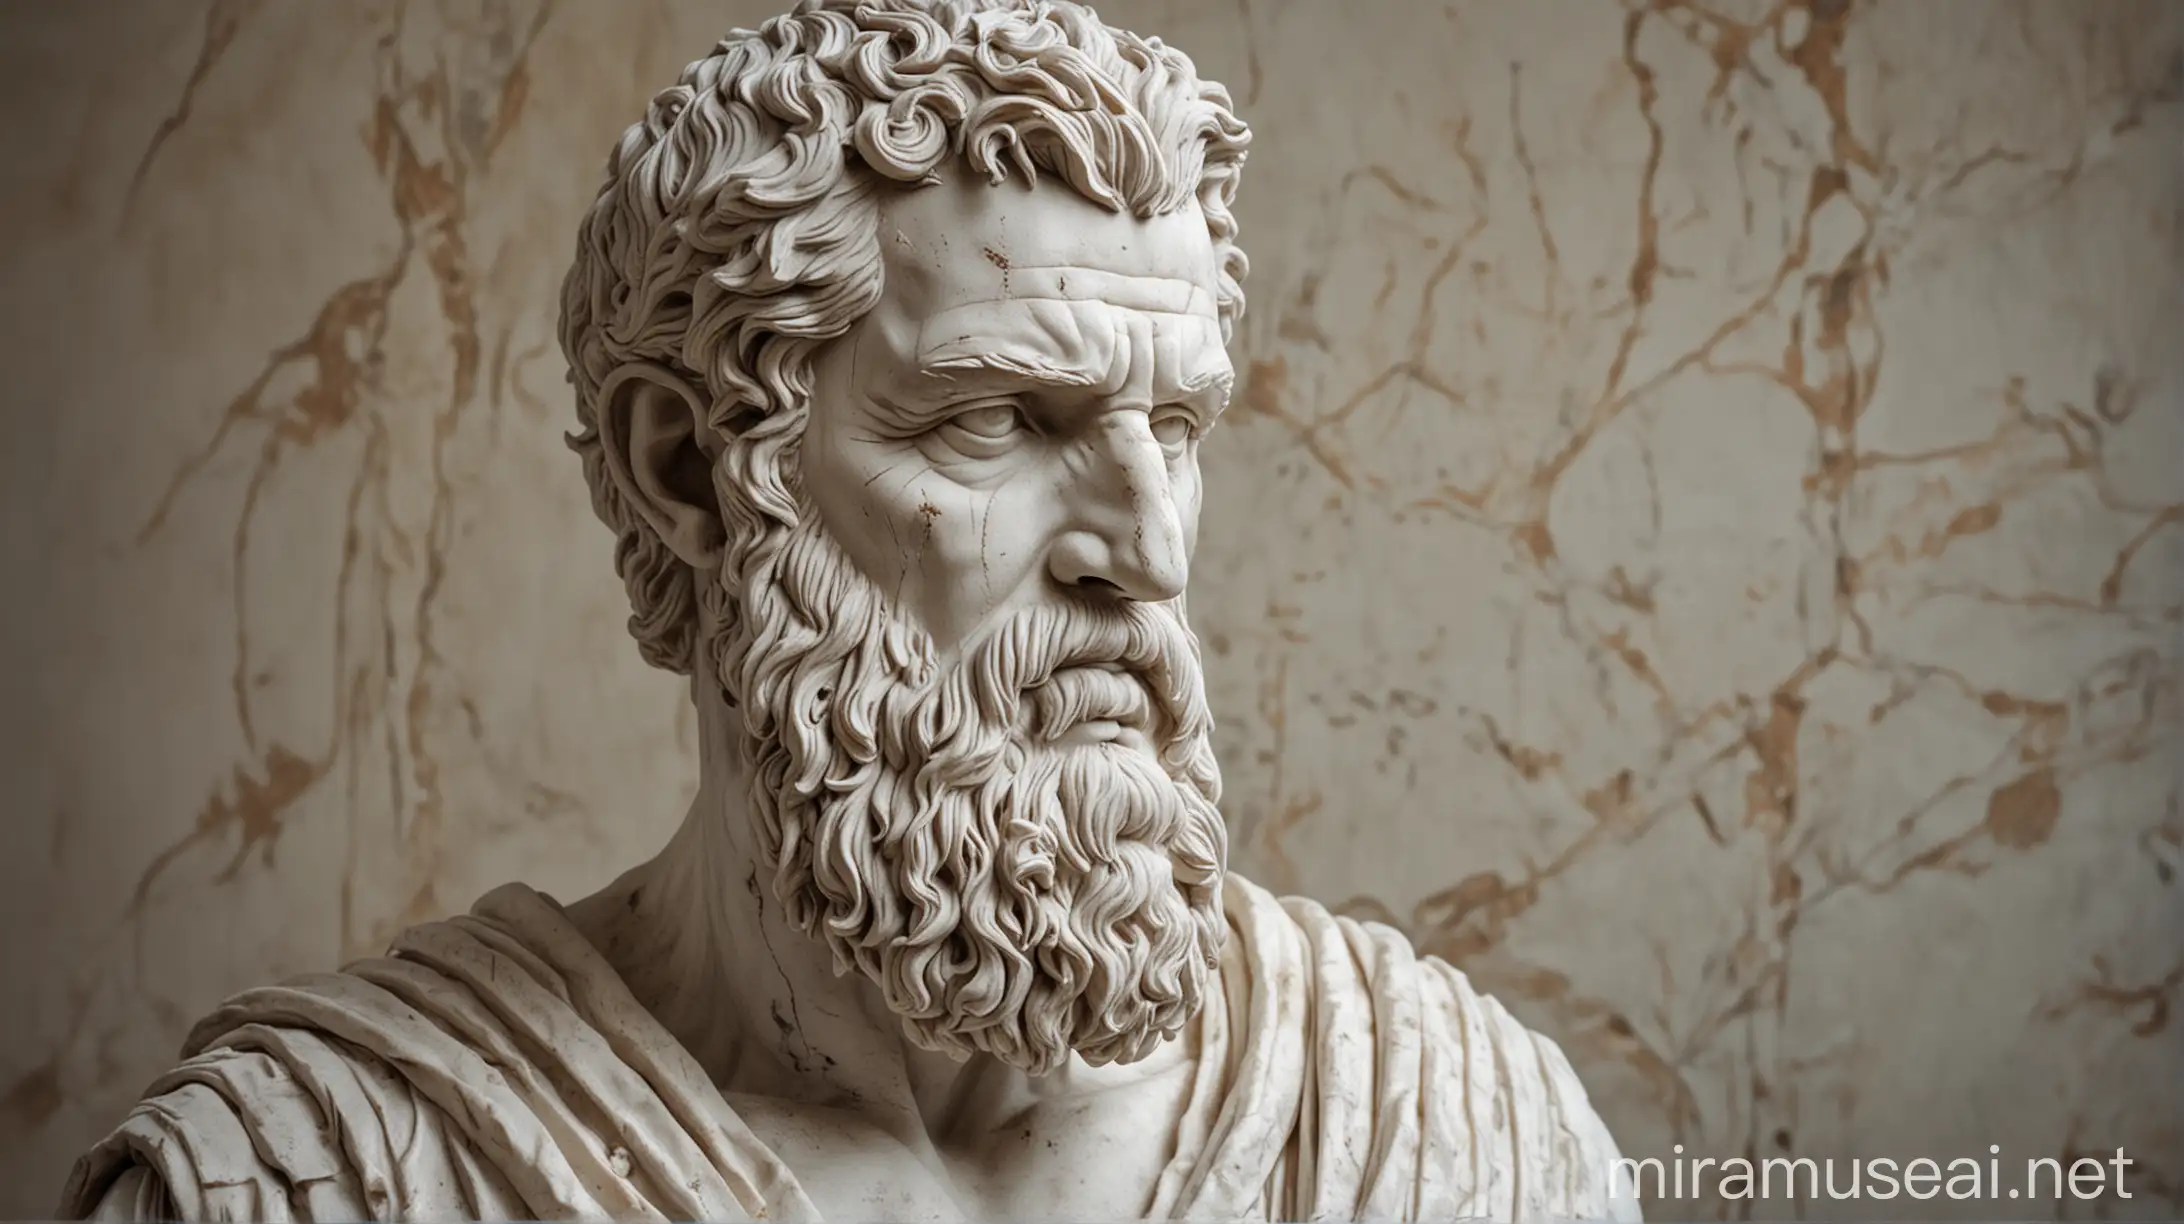 Ancient Greek stoic man statue, white textured, muscular physique, beautiful beard, stoic era background, detailed carving, high quality, realistic sculpture, ancient, stoicism era, white marble, chiseled features, shredded physique, strong, textured, detailed beard, focused expression, atmospheric lighting stoicism background